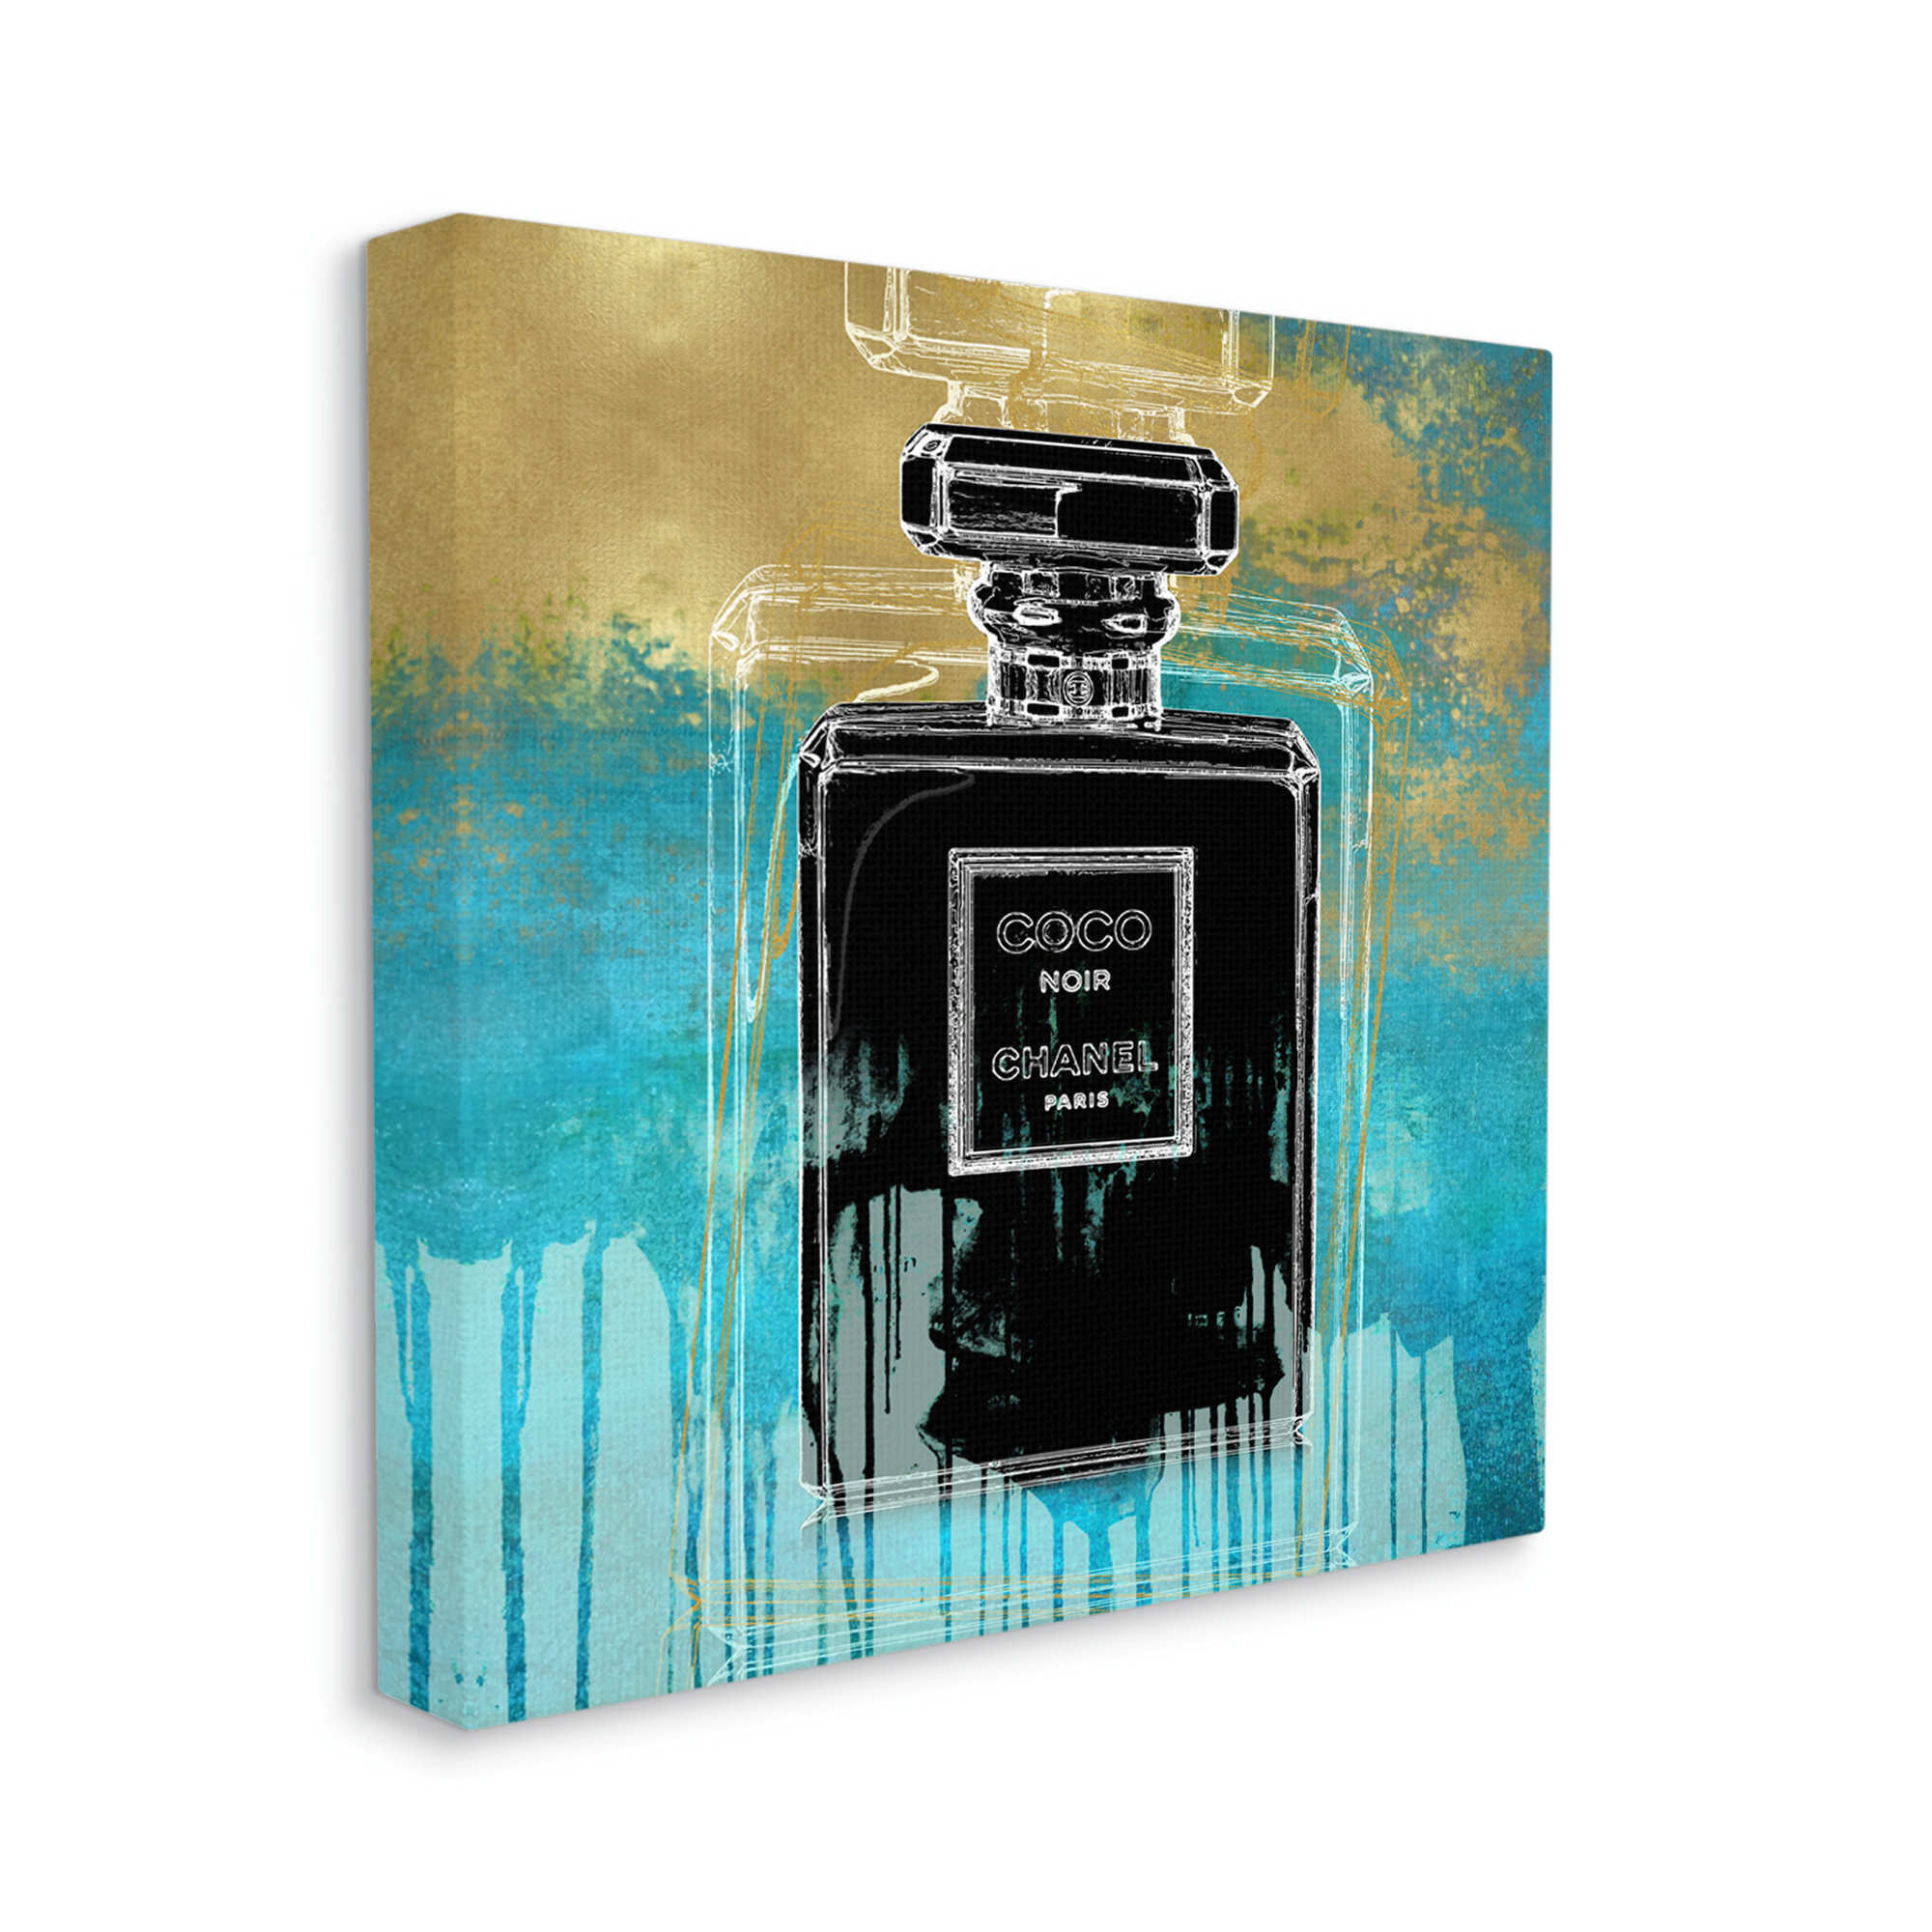 Floral Fragrance II - Wrapped Canvas Painting Print House of Hampton Size: 48 H x 32 W x 1 D